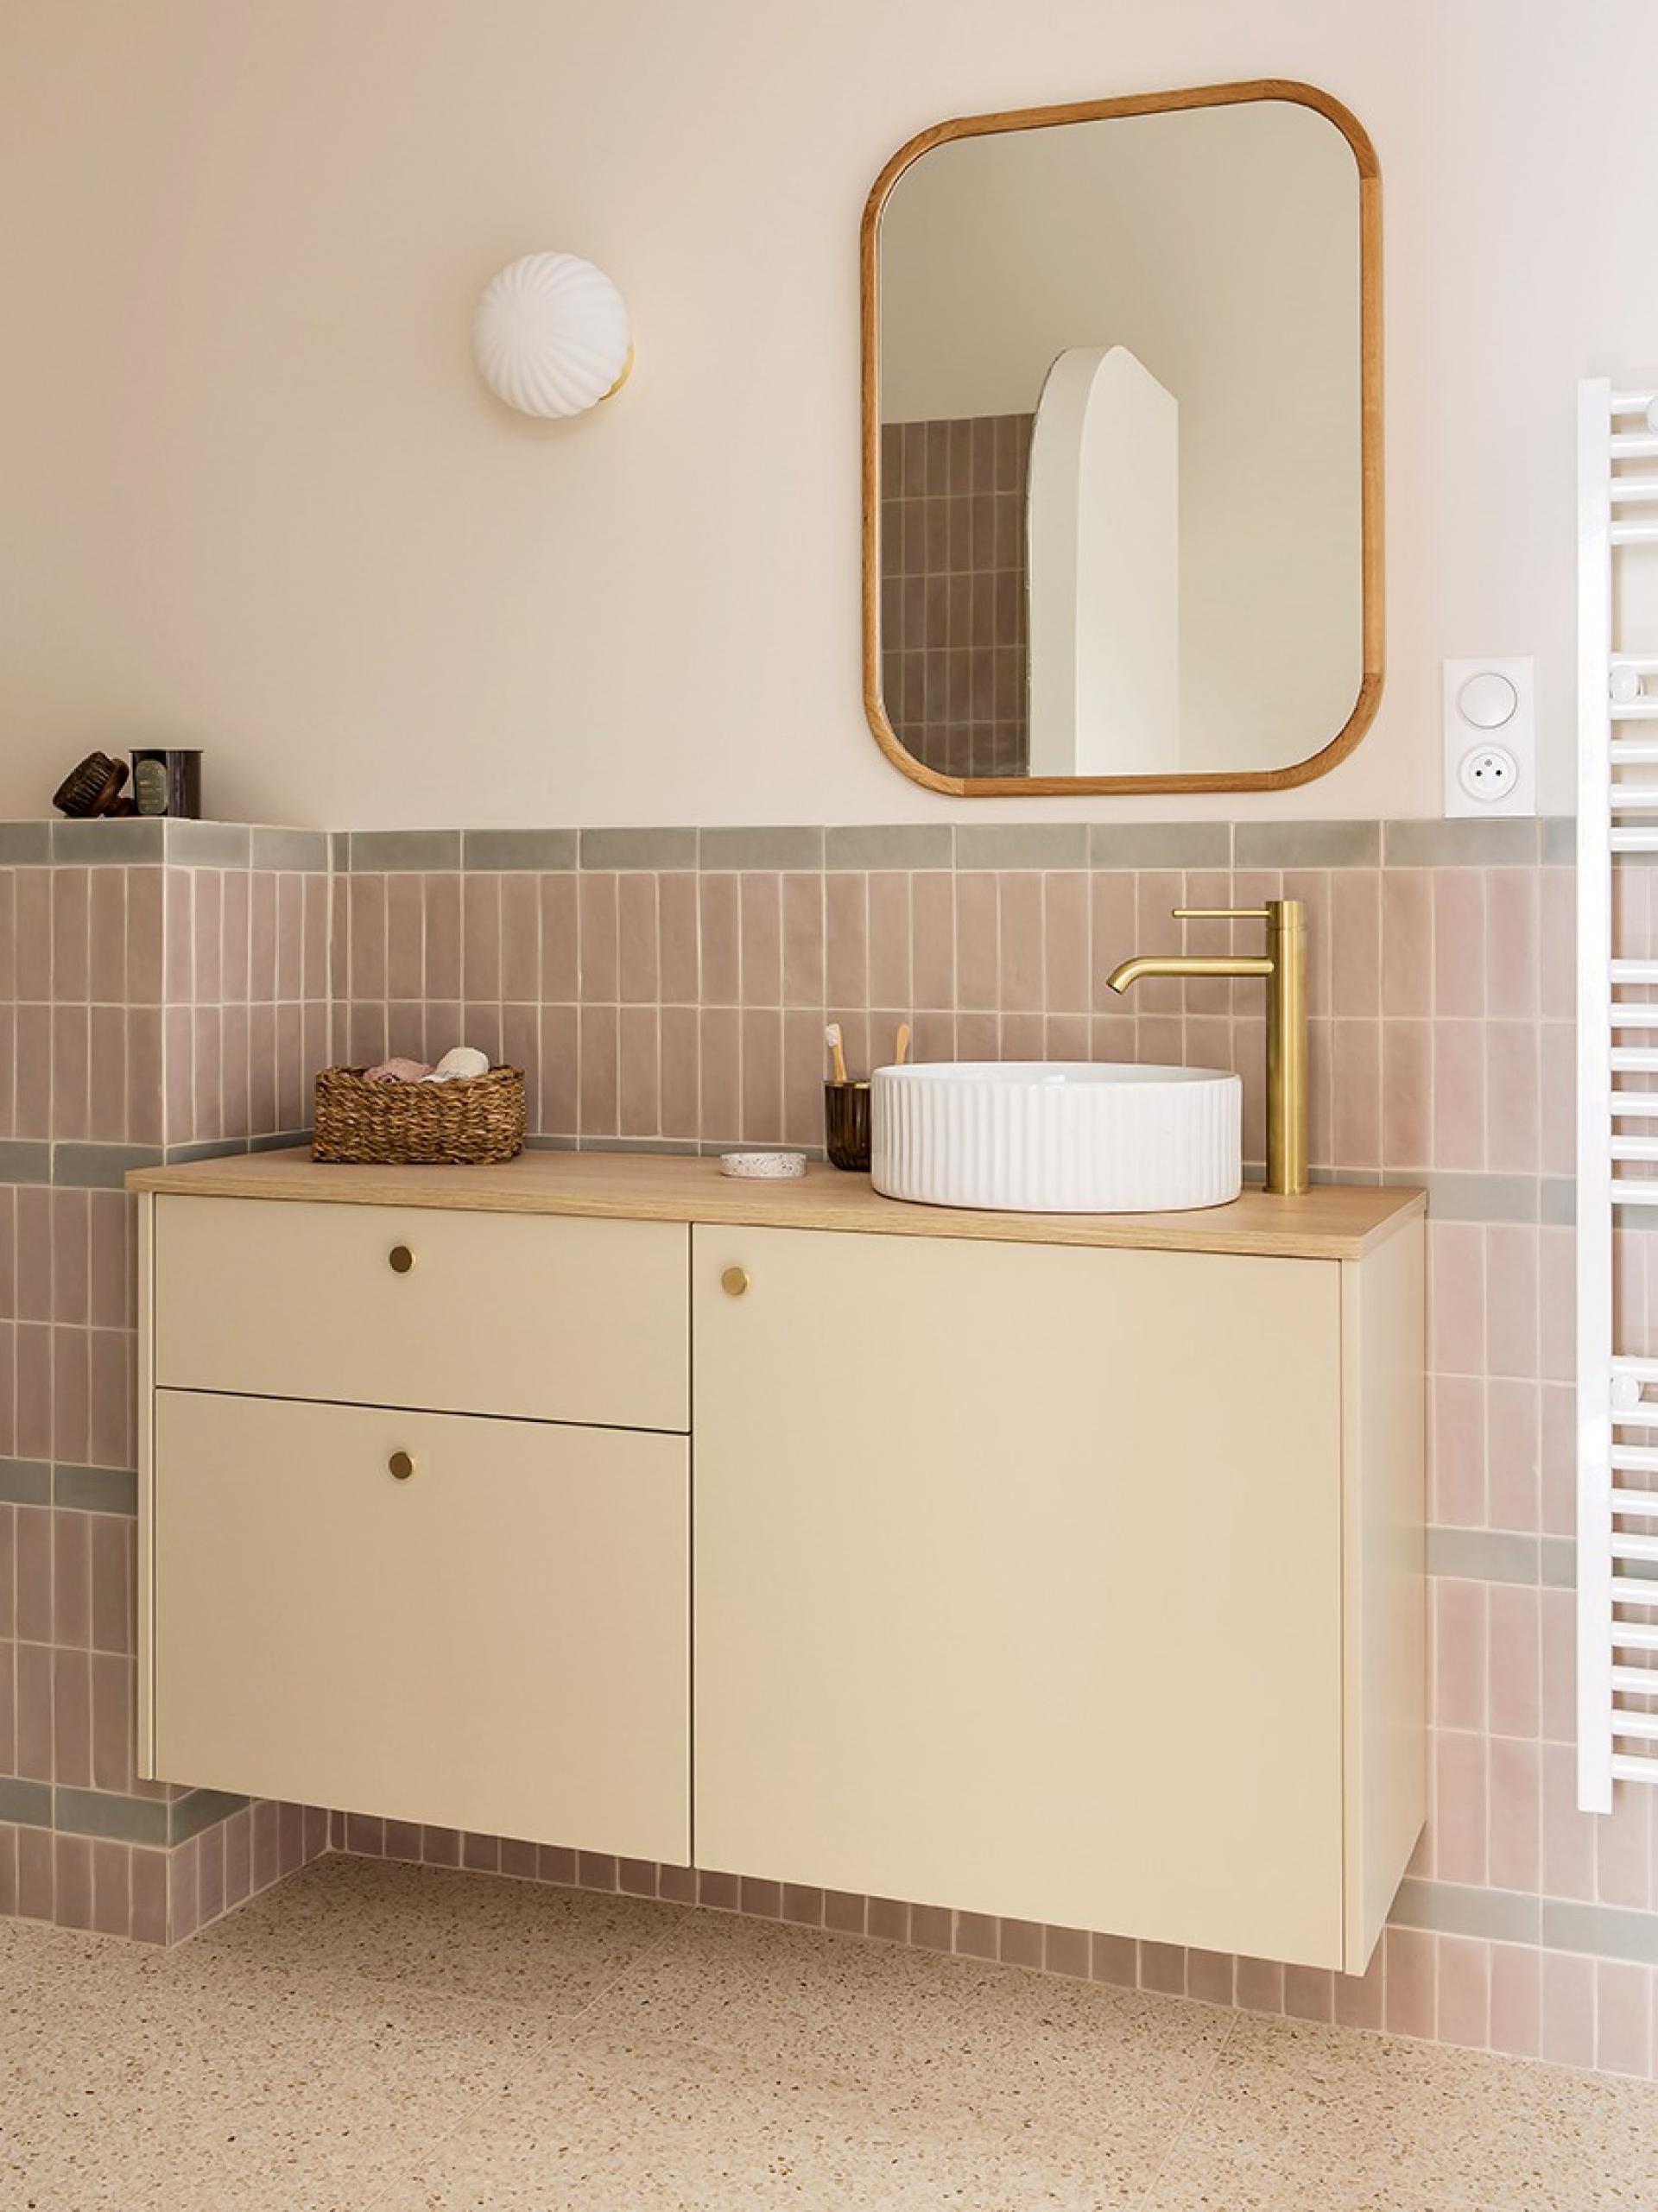 A graphic bathroom by Lala Home